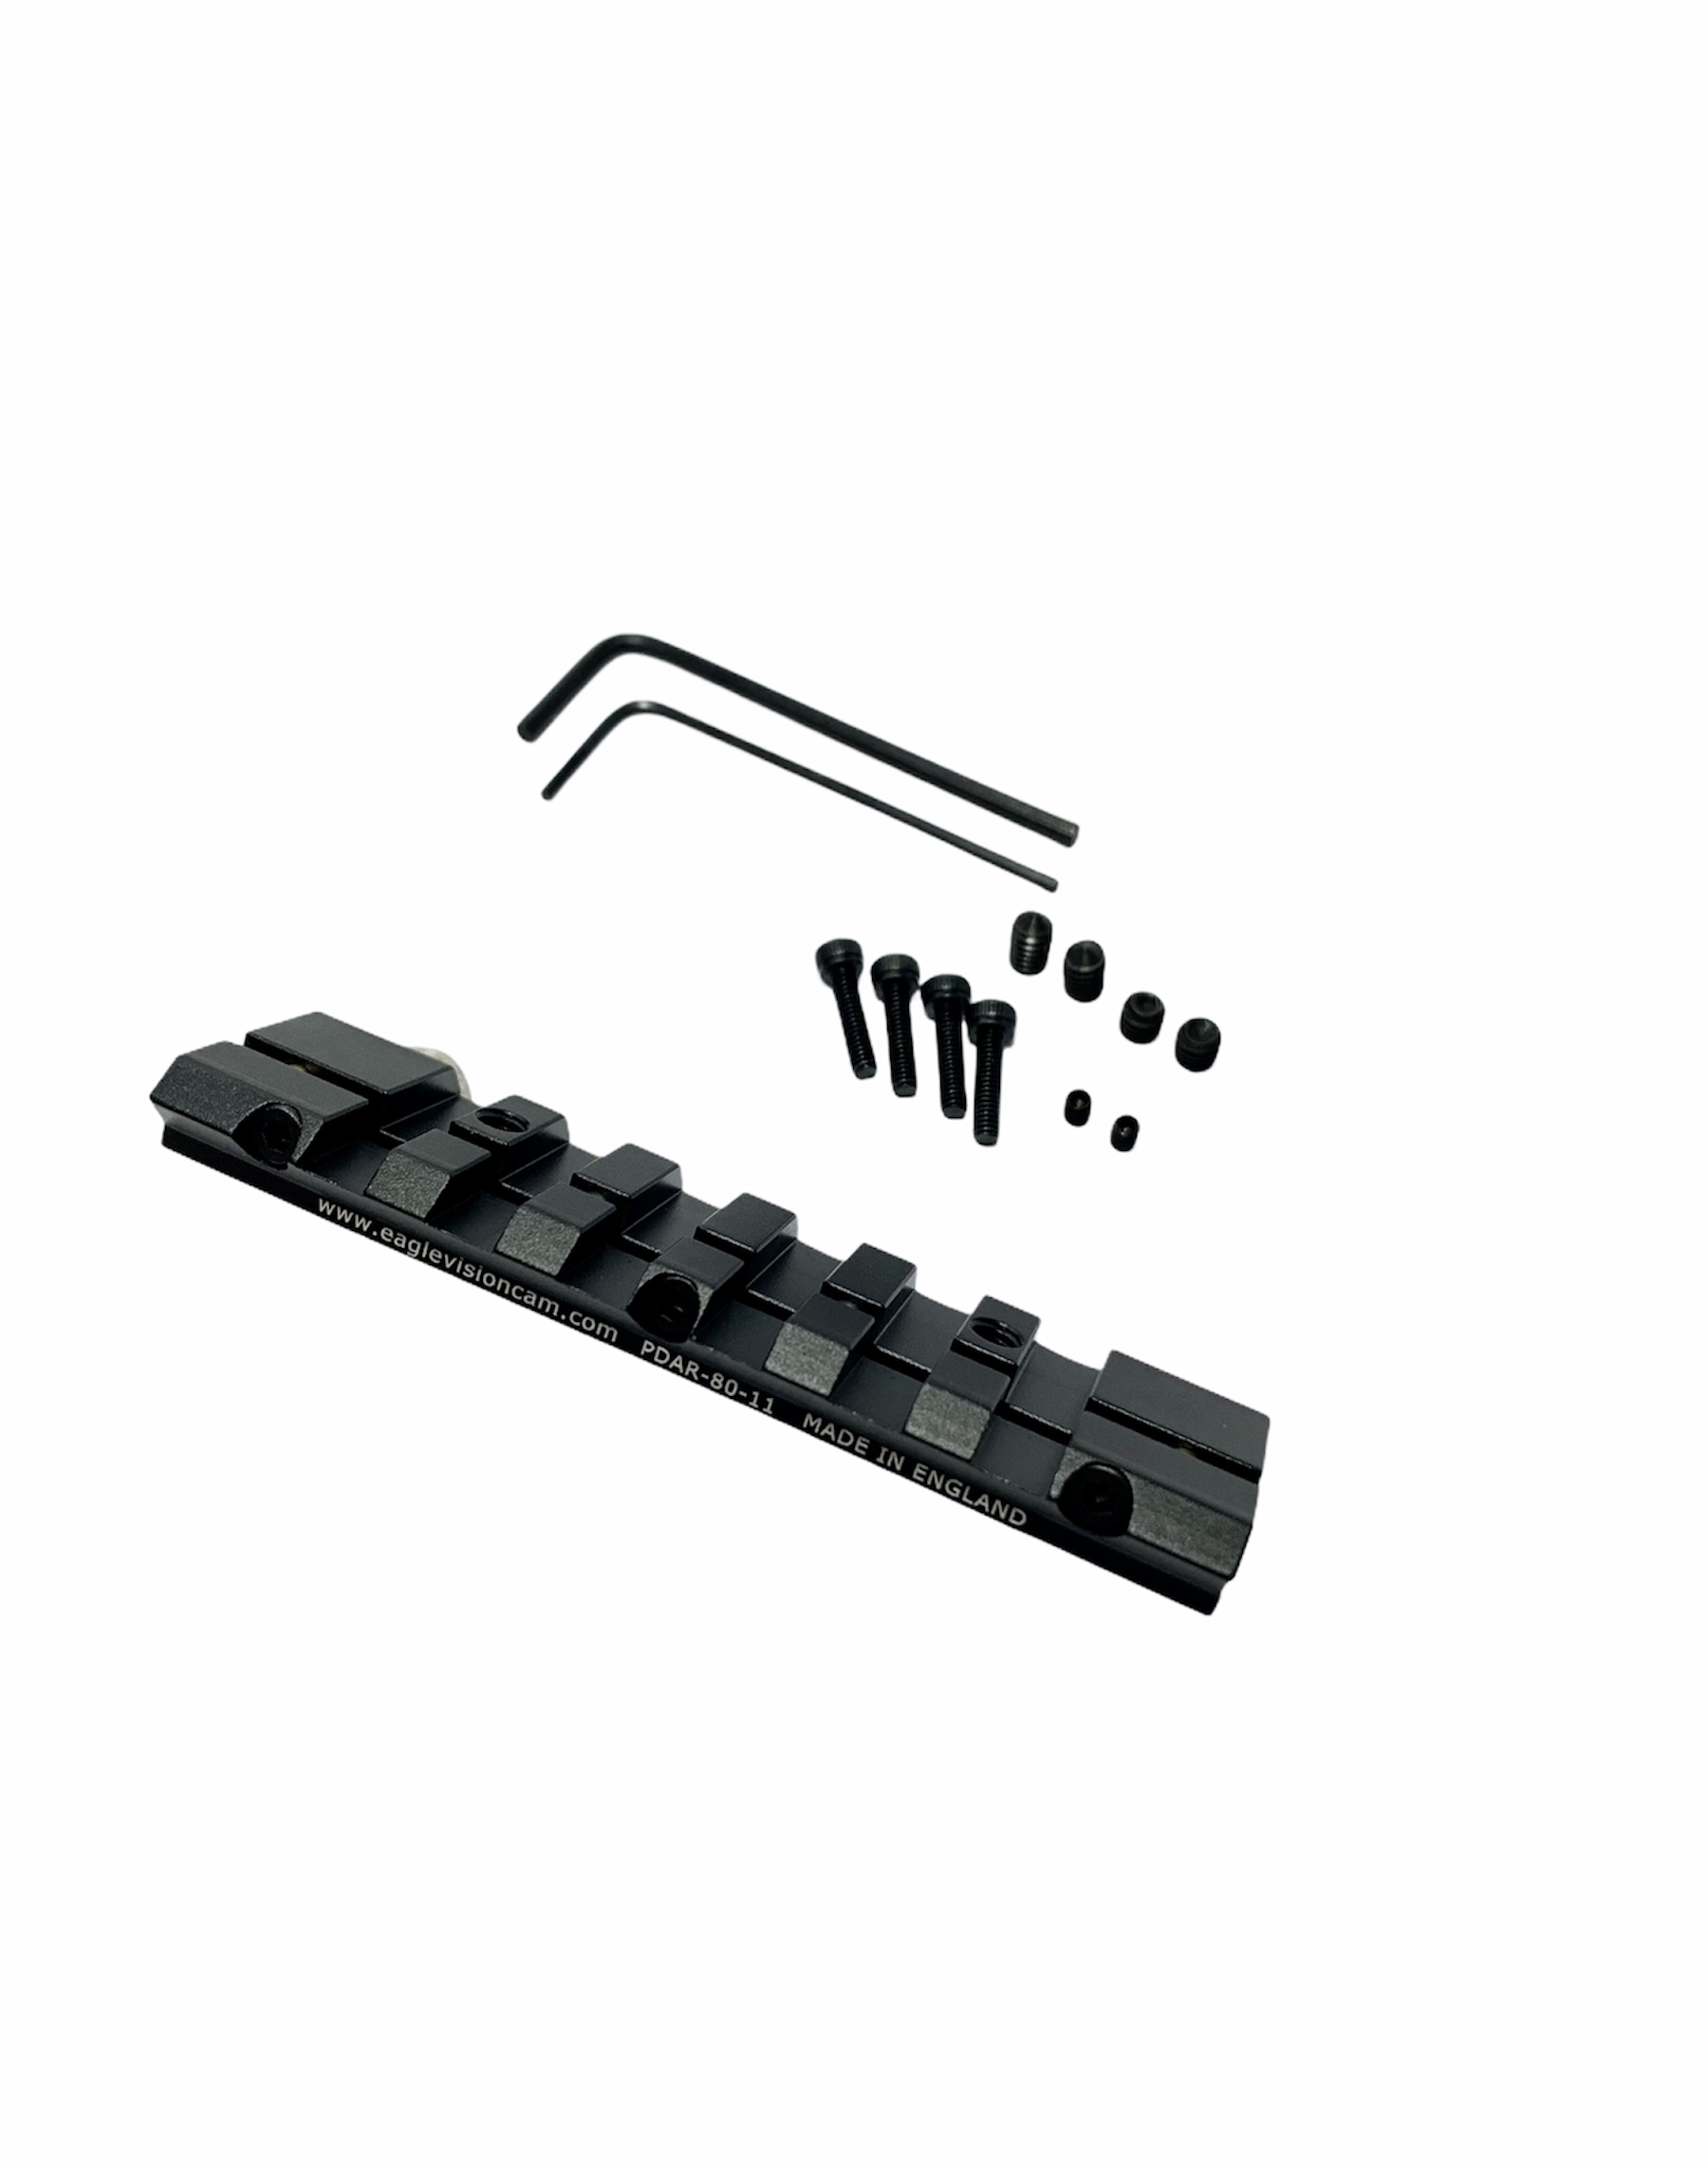 50mm 11mm/13mm Dovetail Adaptors to Picatinny